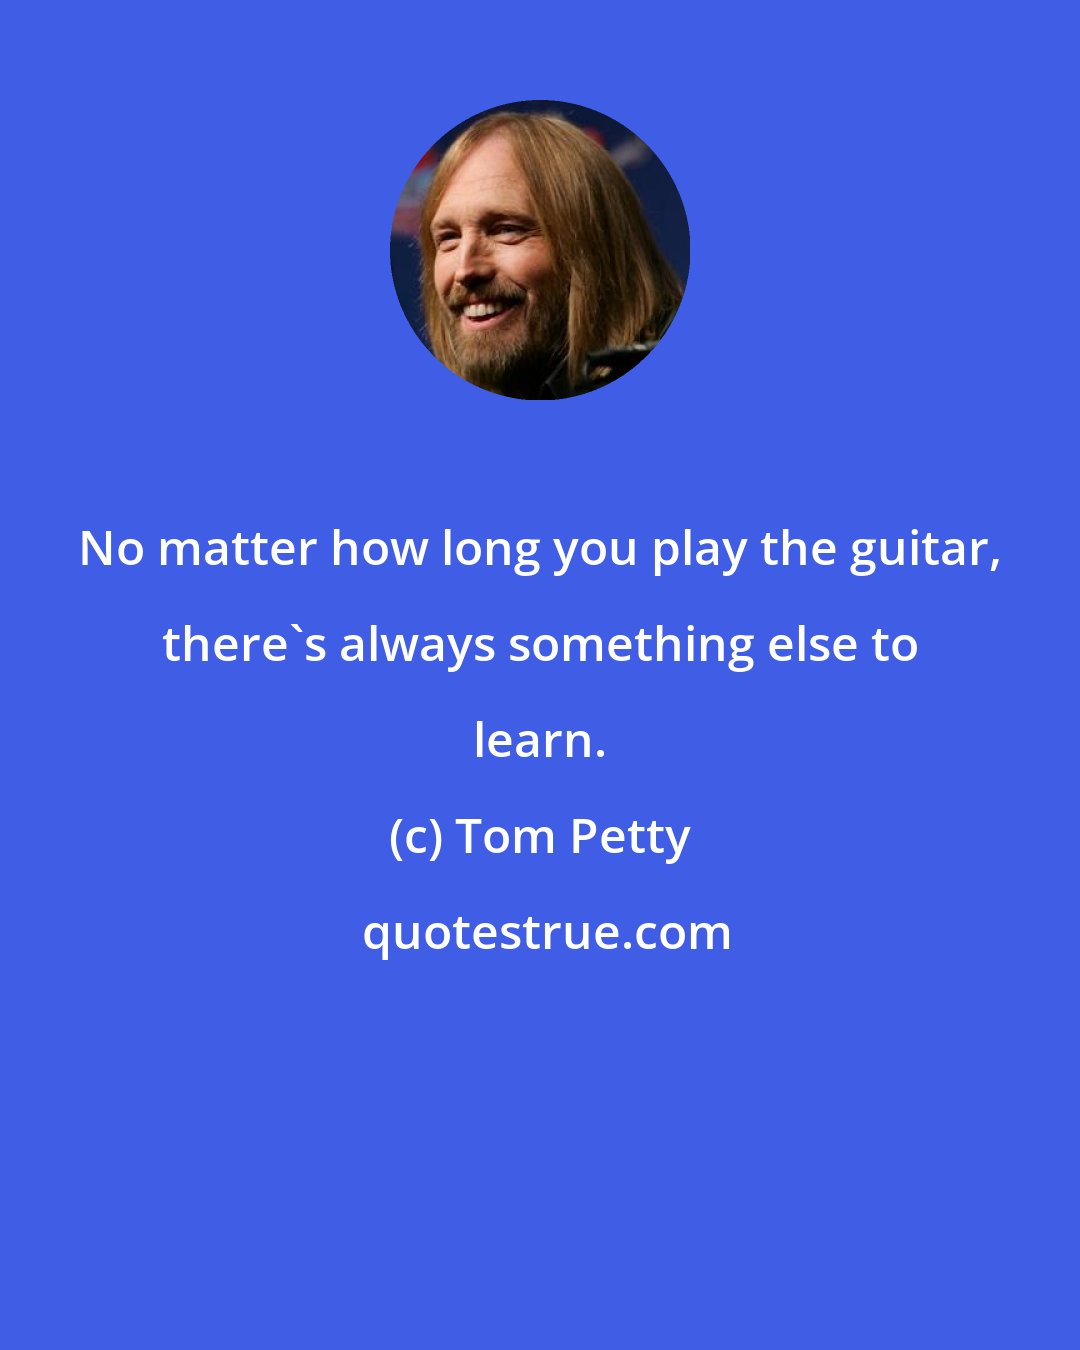 Tom Petty: No matter how long you play the guitar, there's always something else to learn.